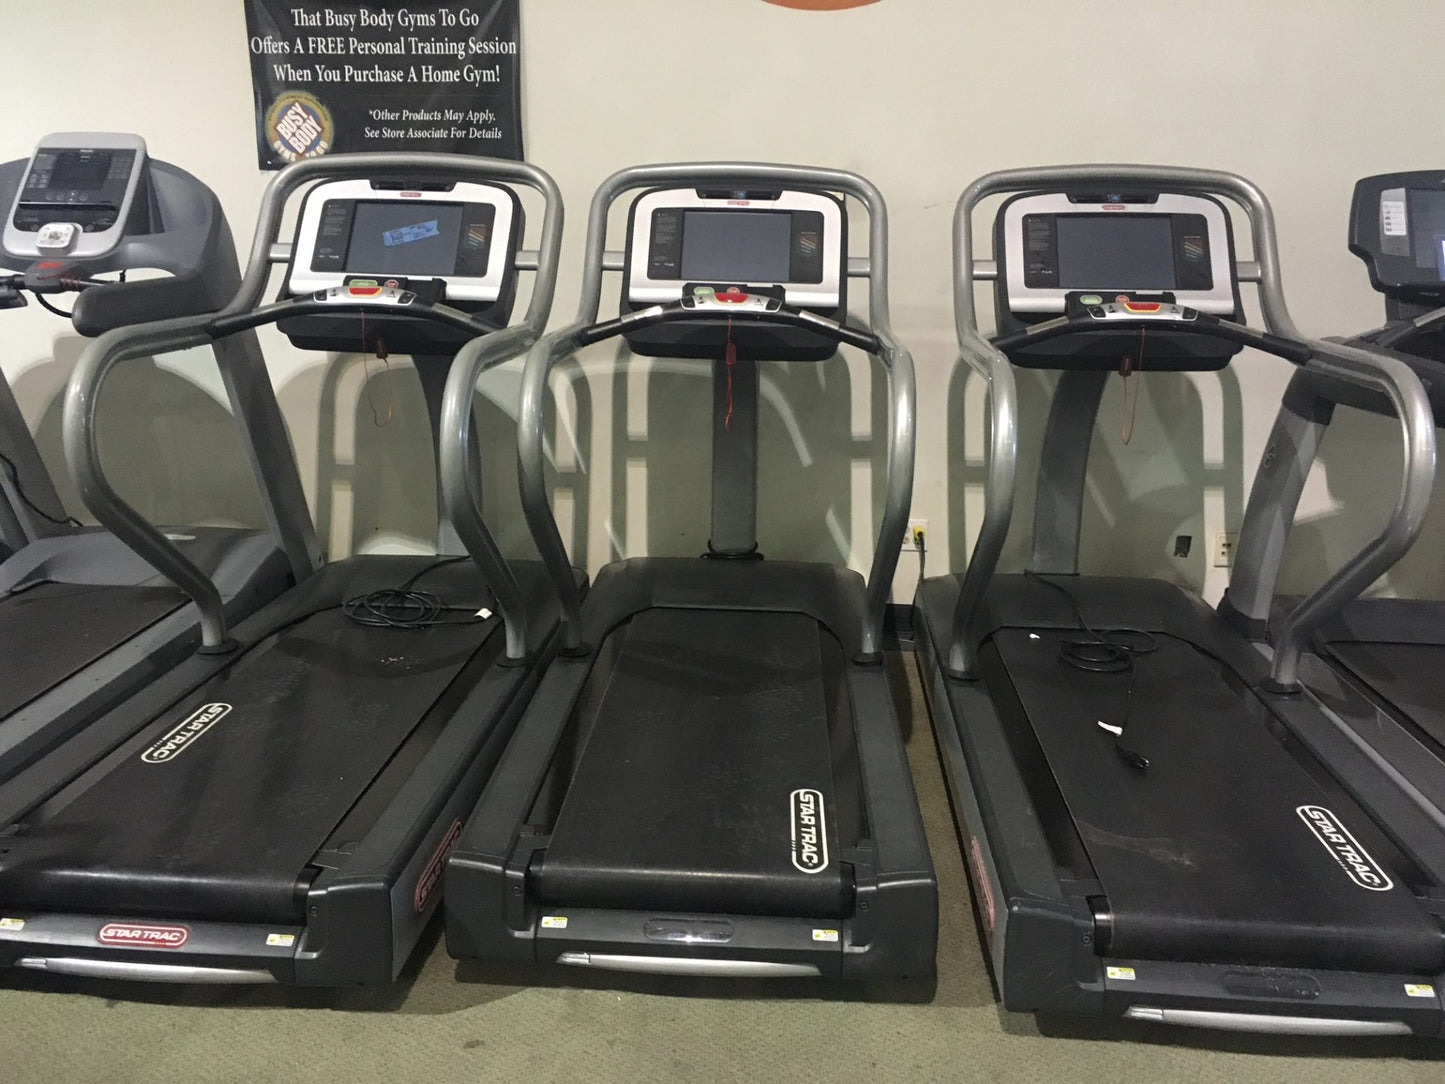 Startrac 4500 treadmill with integrated television (Used)